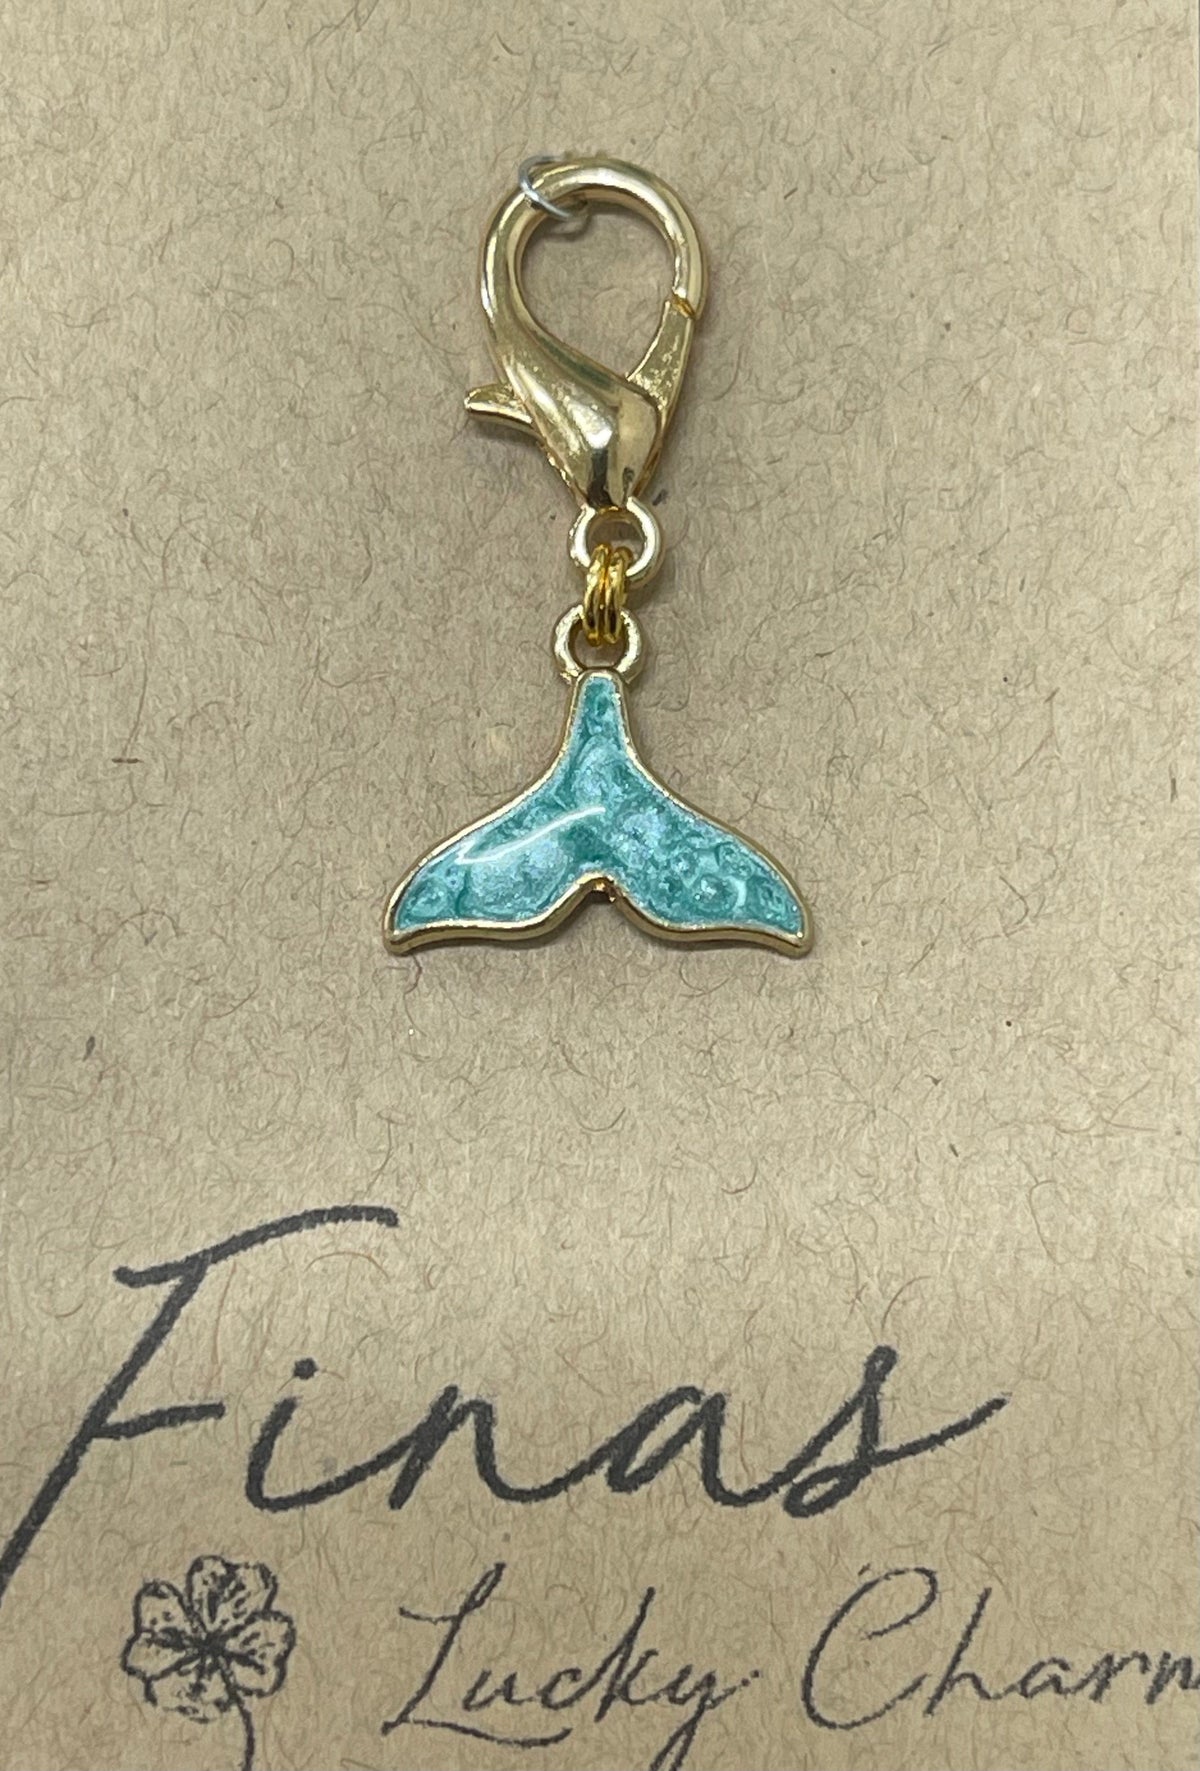 Fina's Lucky Charm charm Whale/Mermaid Tail (Teal) Fina's Lucky Charm equestrian team apparel online tack store mobile tack store custom farm apparel custom show stable clothing equestrian lifestyle horse show clothing riding clothes horses equestrian tack store